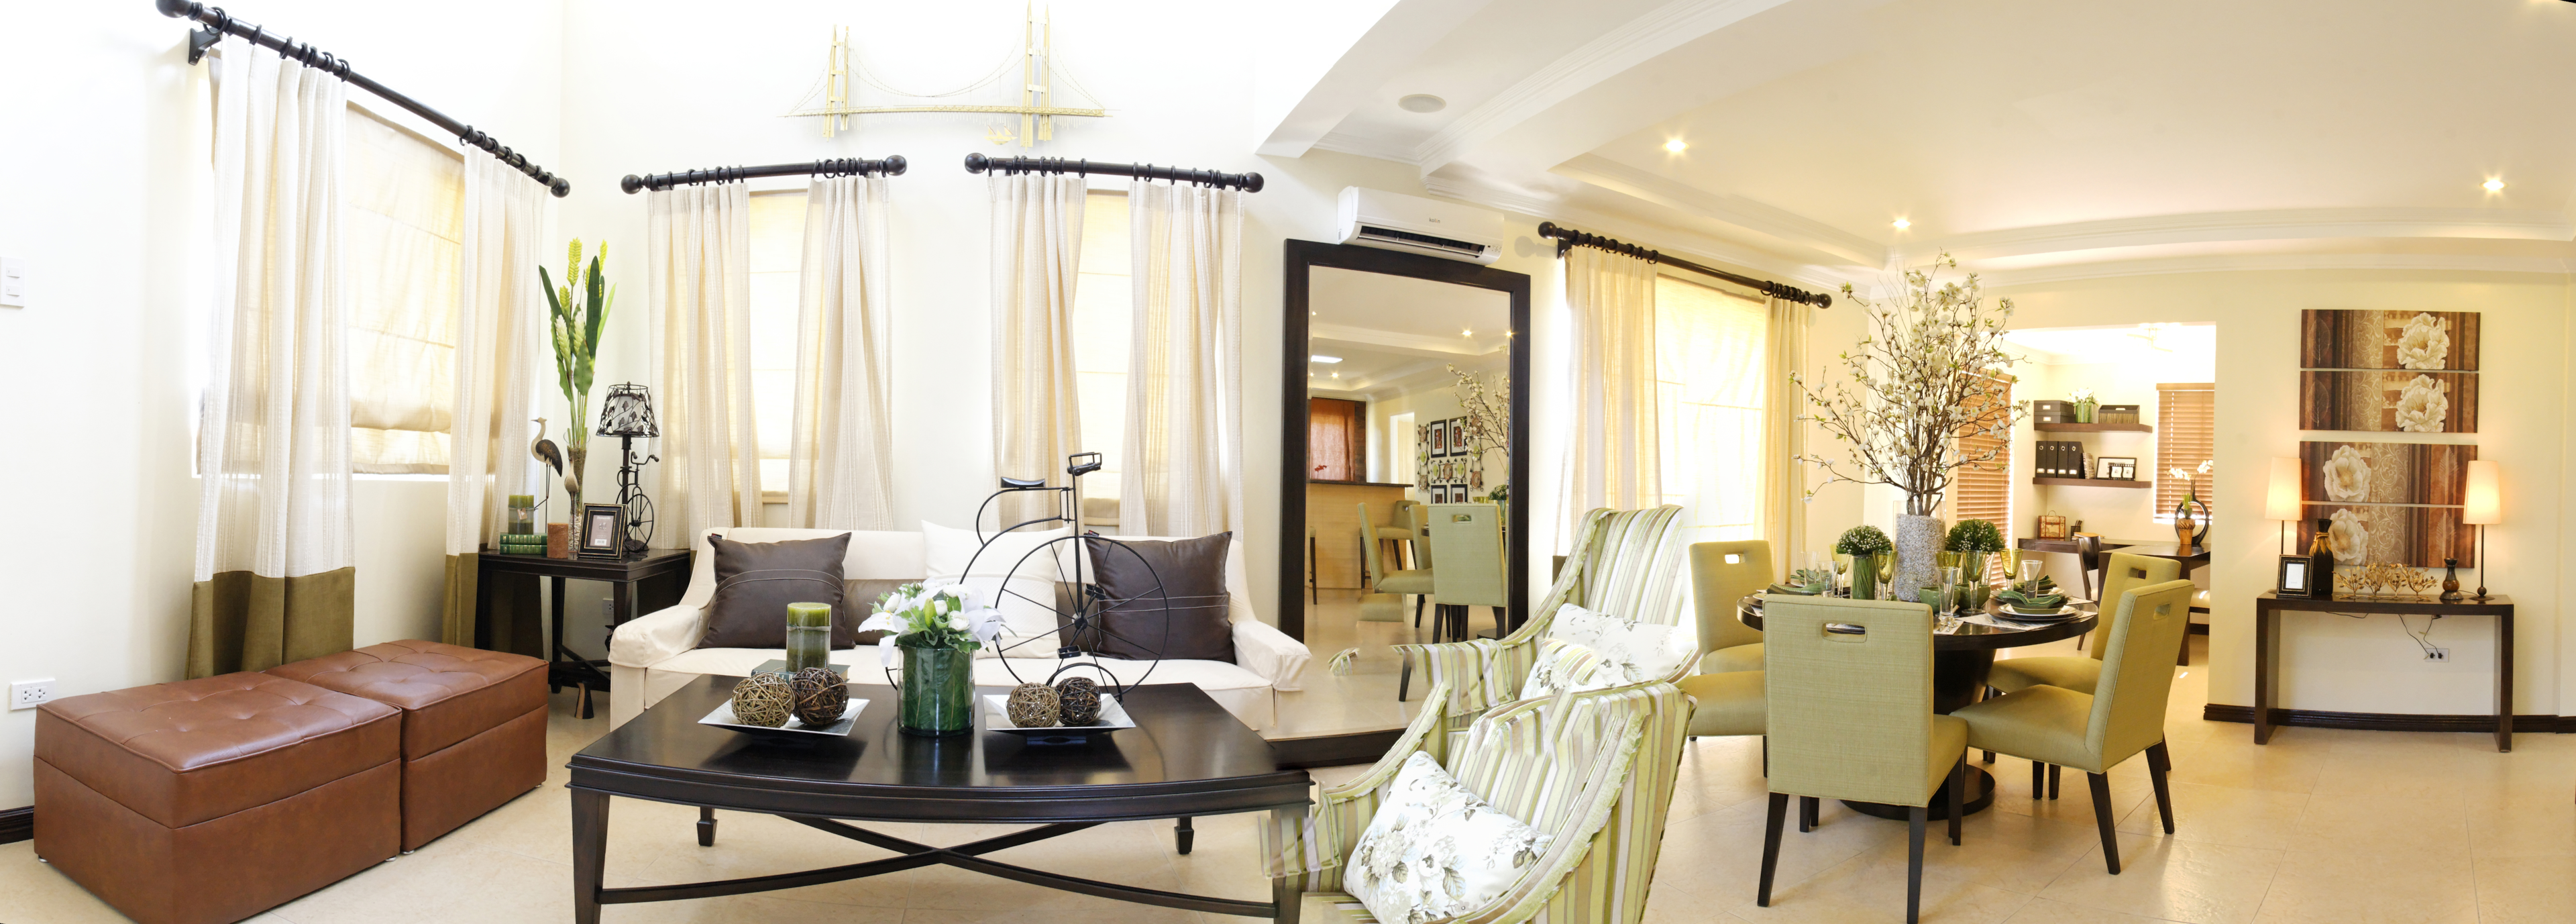 A peek to the inside of one of the units of Amore at Portofino in Vista Alabang.